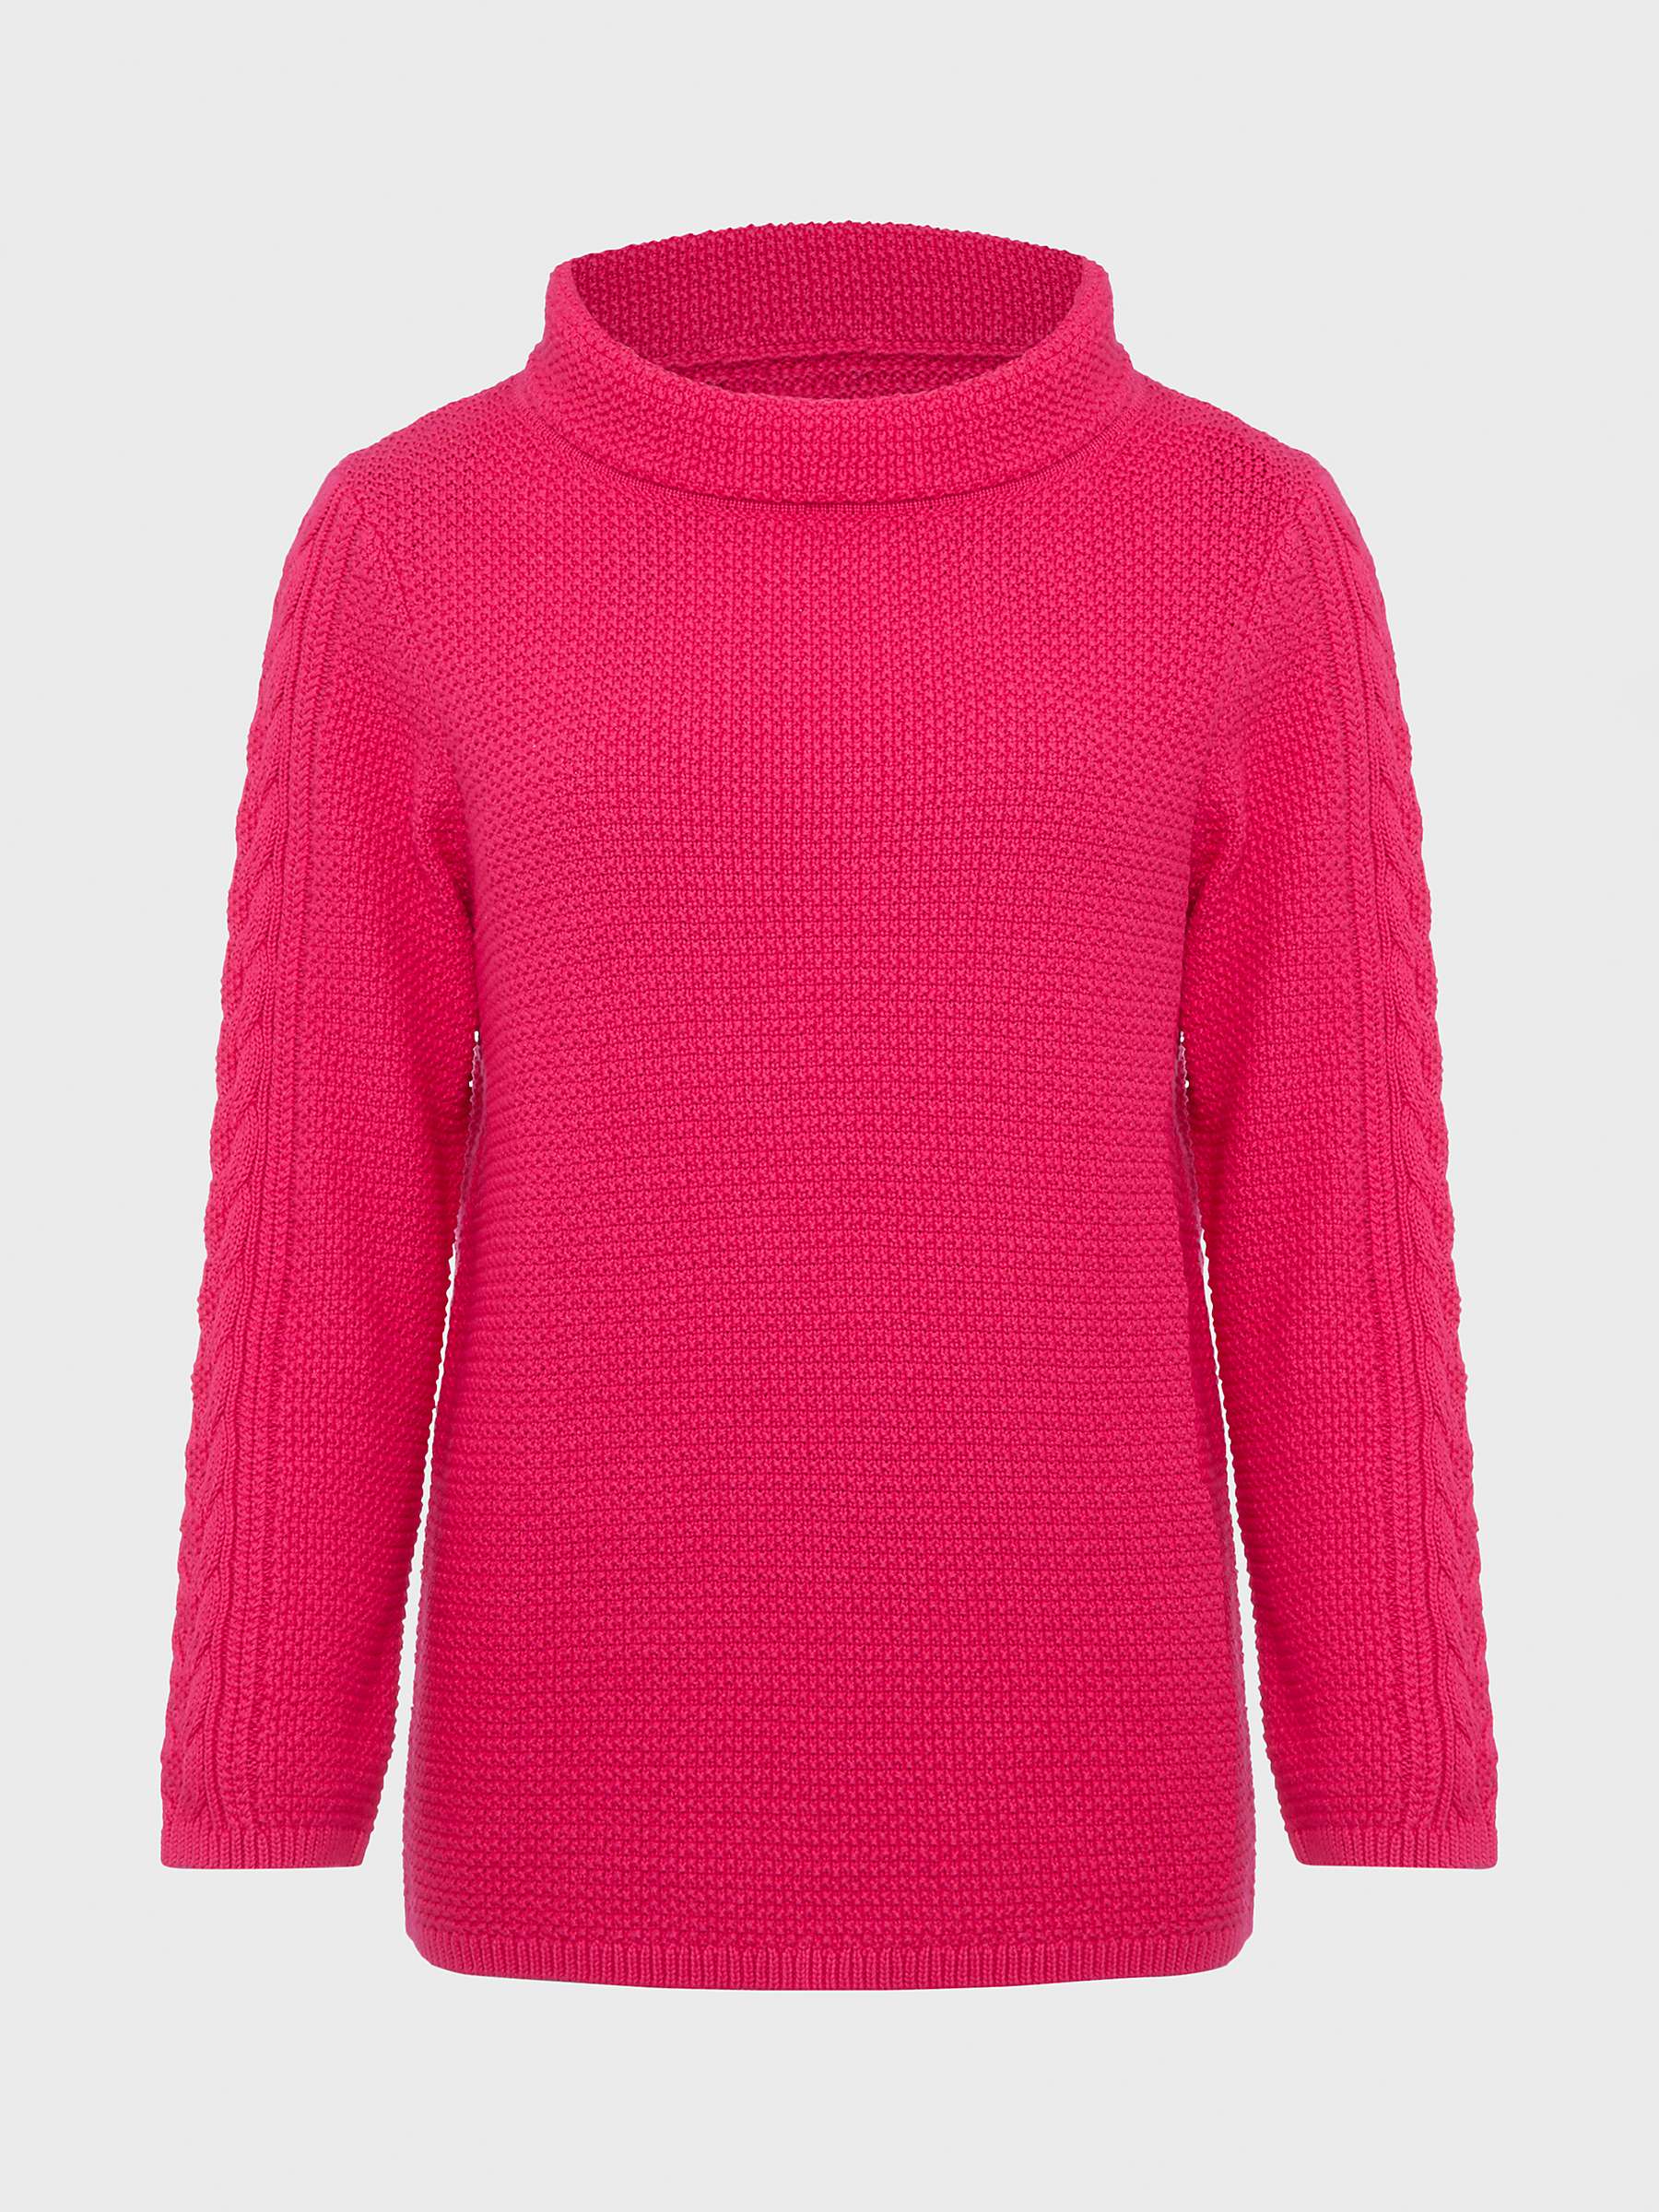 Buy Hobbs Camilla Cable Knit Detail Jumper Online at johnlewis.com